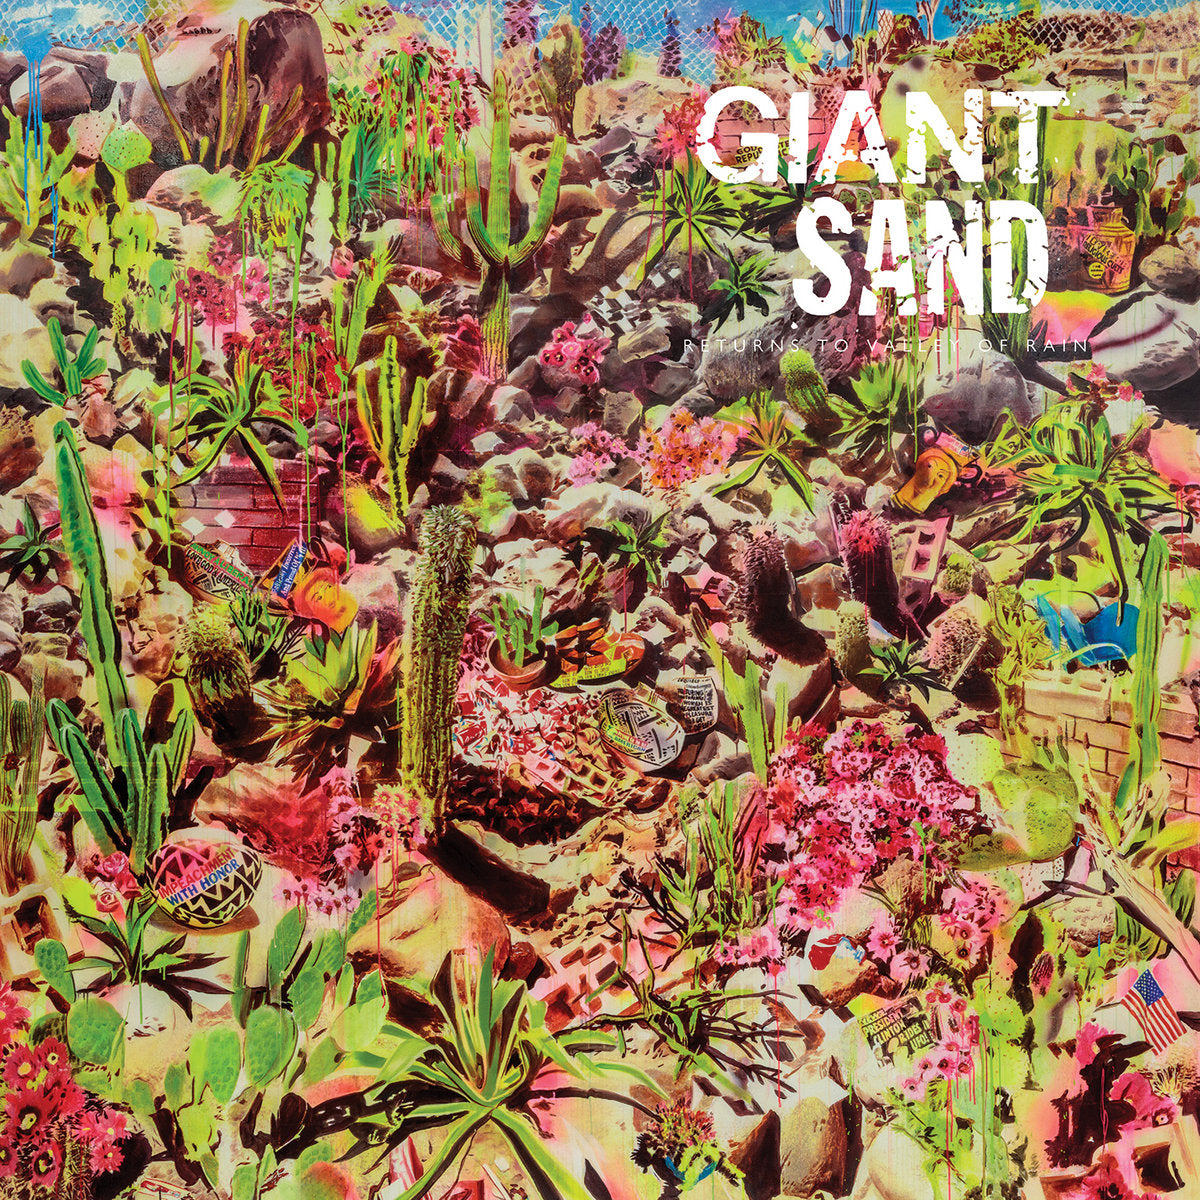 Giant Sand ~ Returns To Valley Of Rain